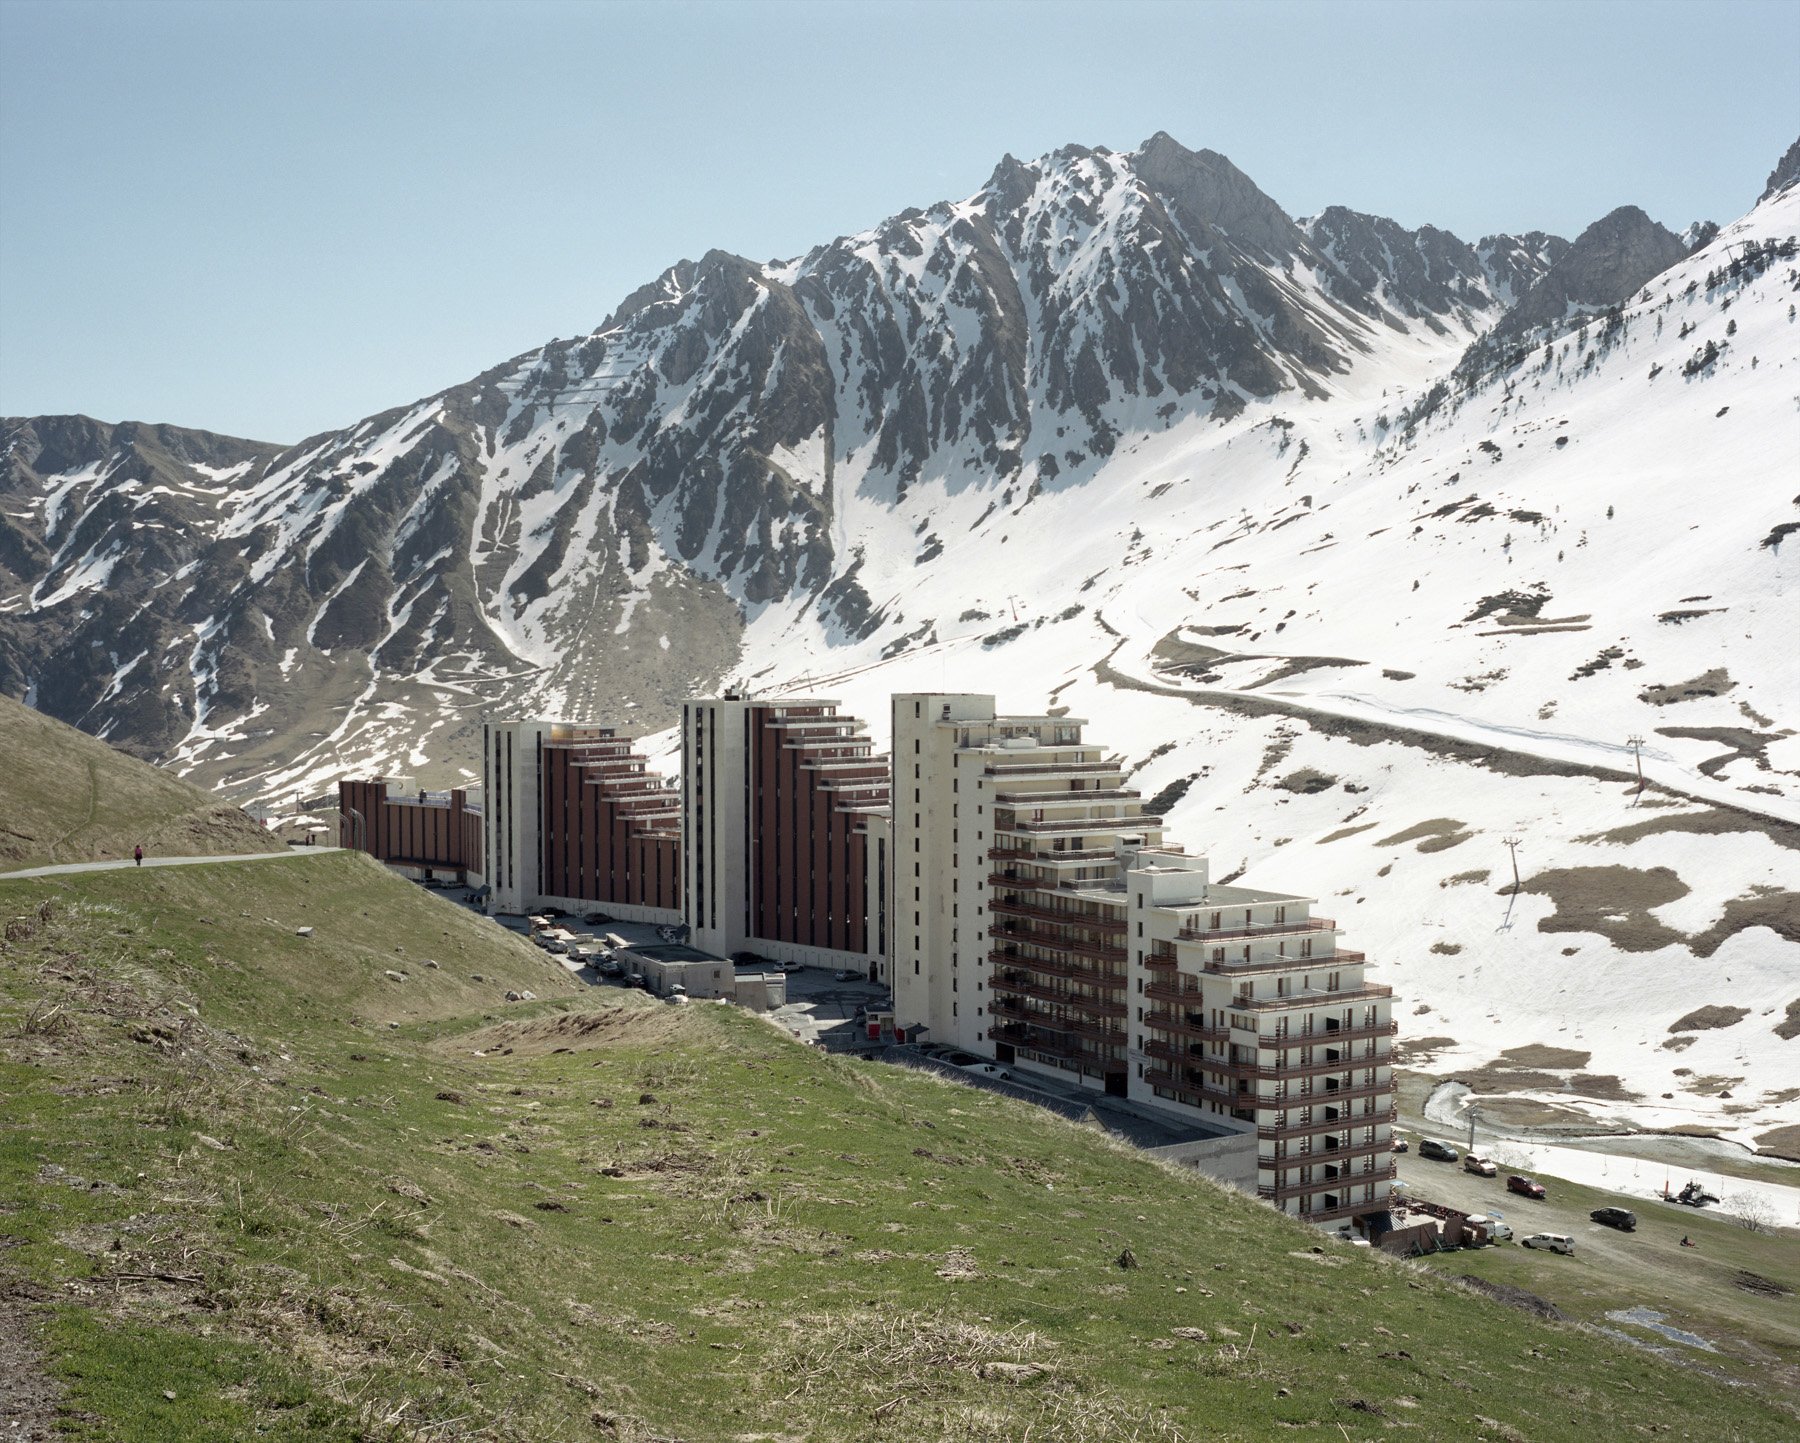  France, La Mongie. 2017. A view of a building belonging to a ski resort. According to the European Environment Agency, Europe’s mountain regions may suffer some of the most severe impacts of climate change. Increasing temperatures can change snow-co